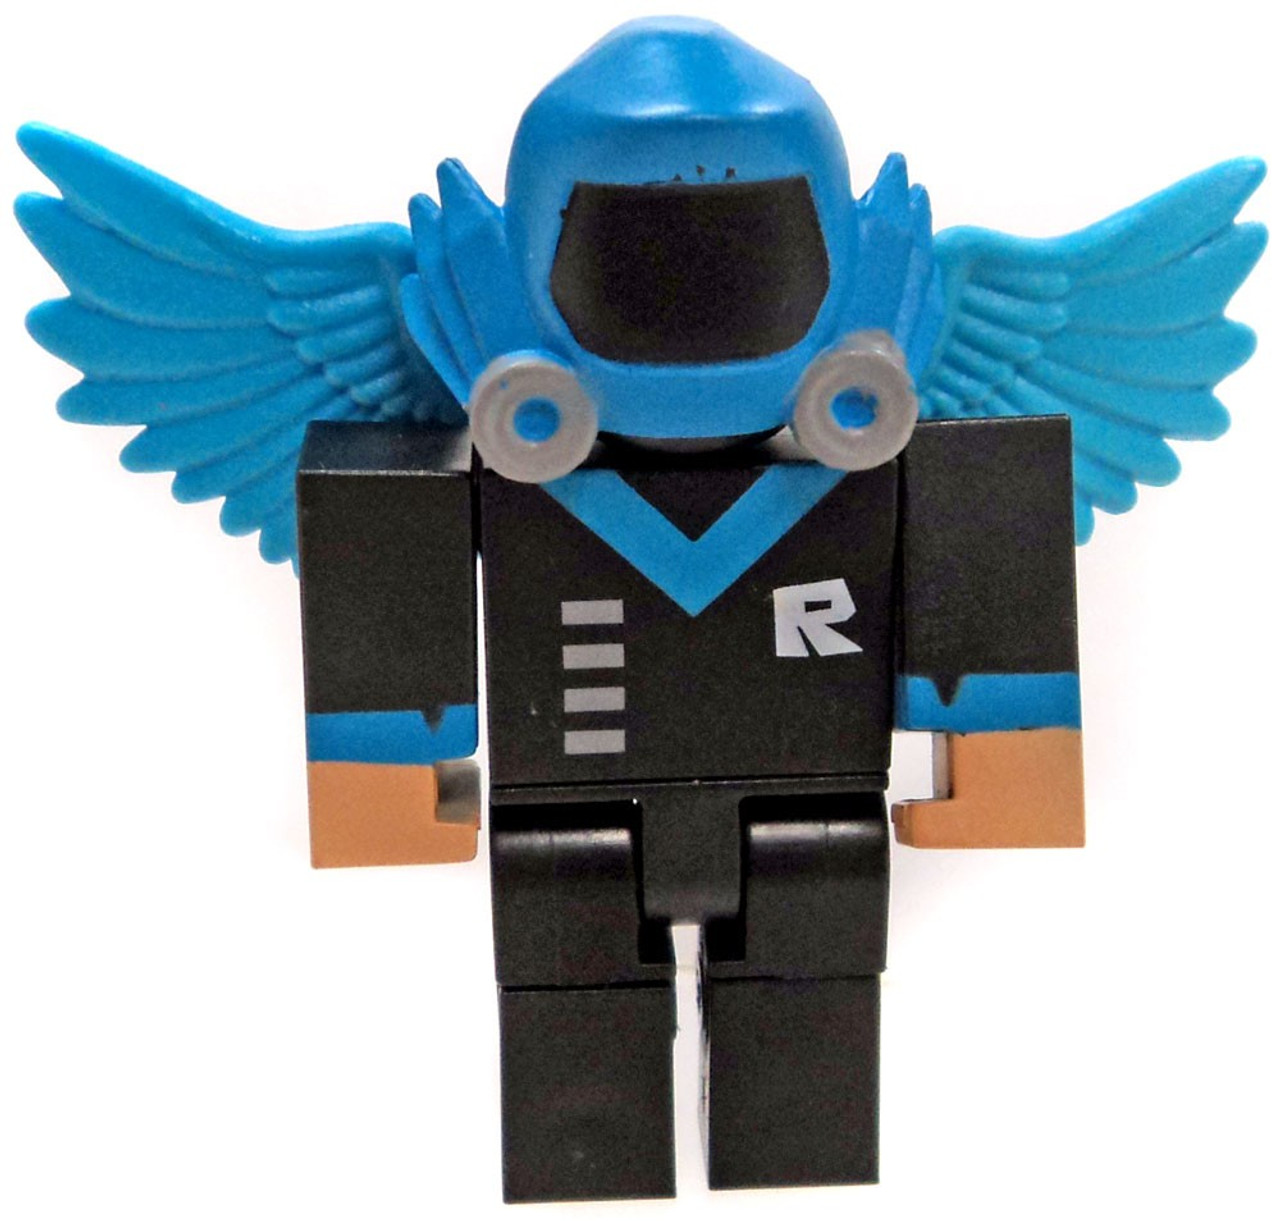 Overseer Wings Codes For Roblox Free Robux Hack That Works 2018 - wings code on roblox